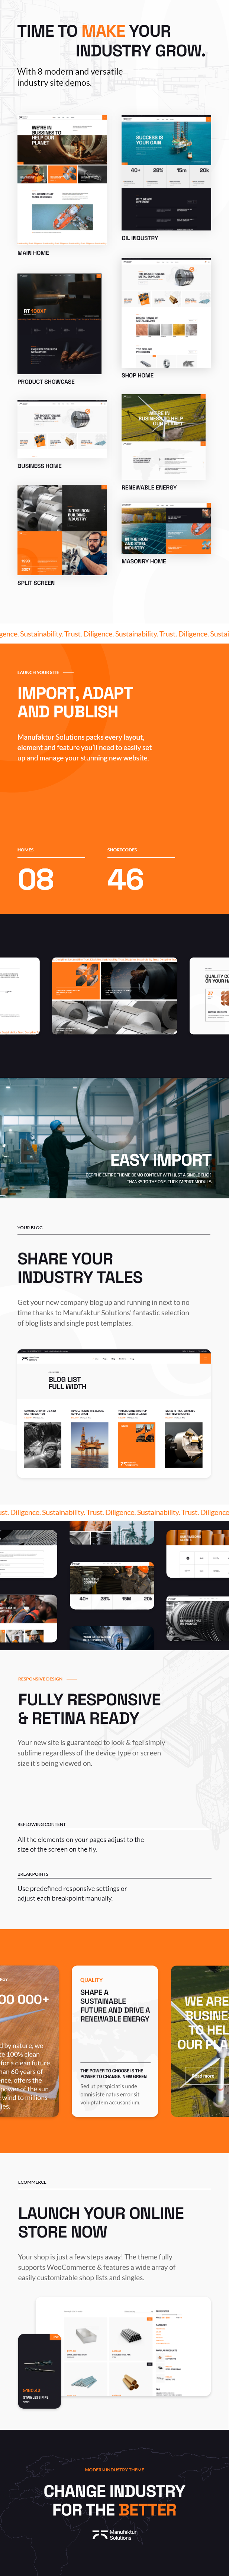 Manufaktur Industrie - Industry and Factory Theme - 3